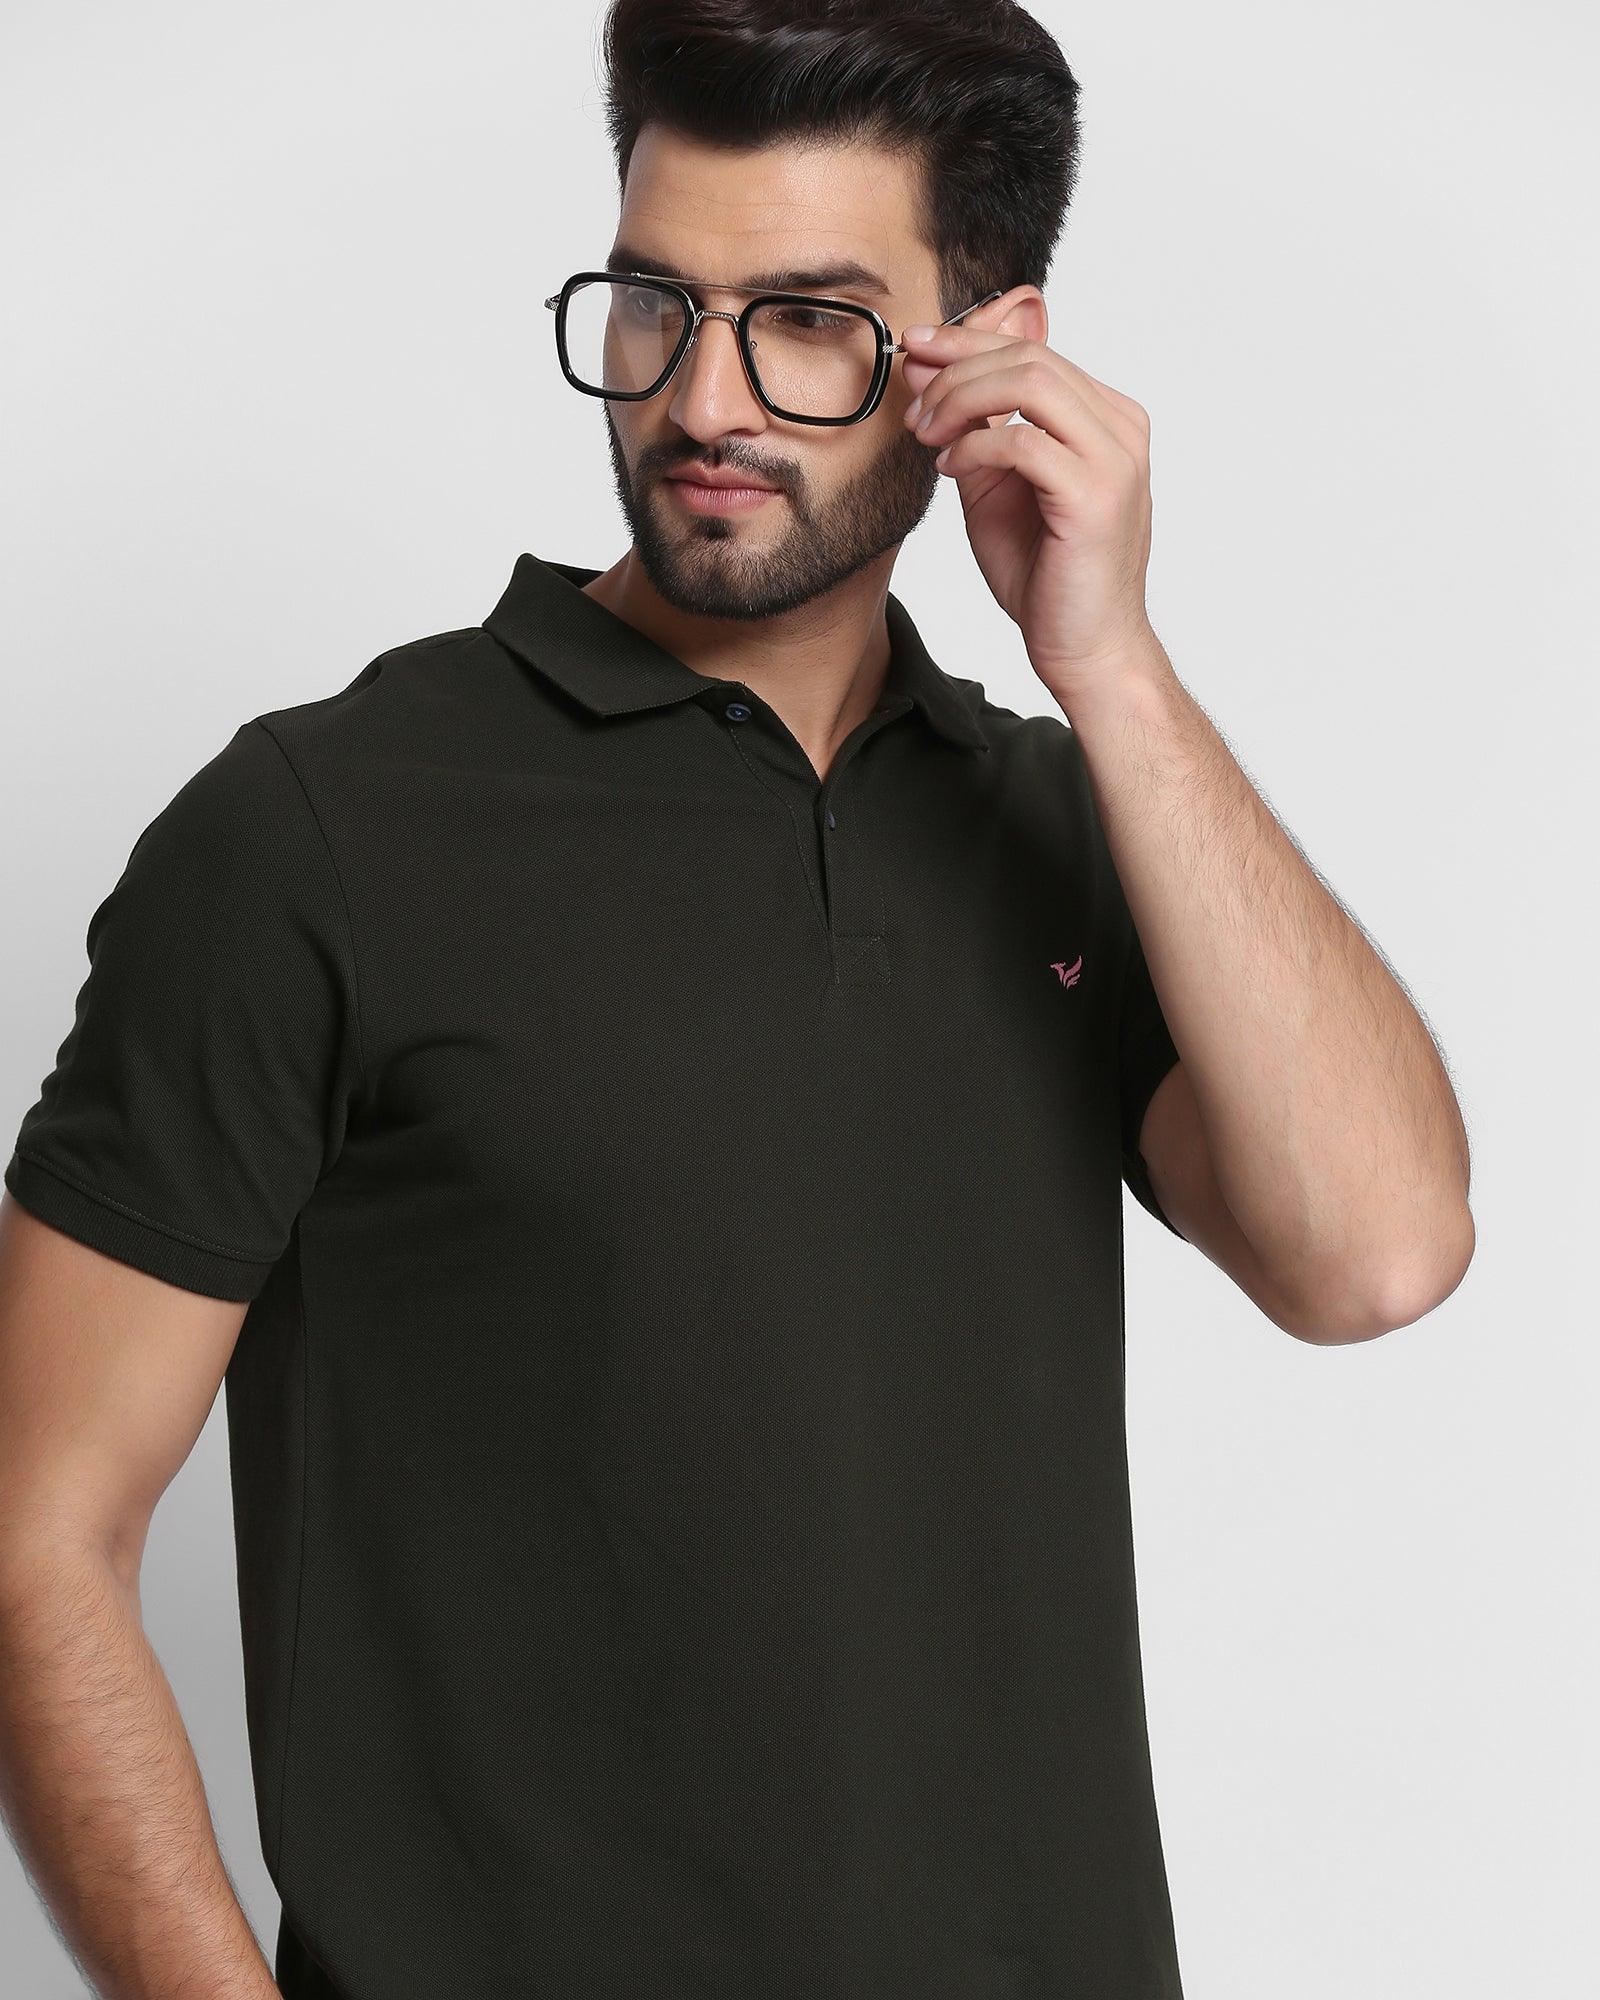 Polo T Shirt In Olive (Brune)